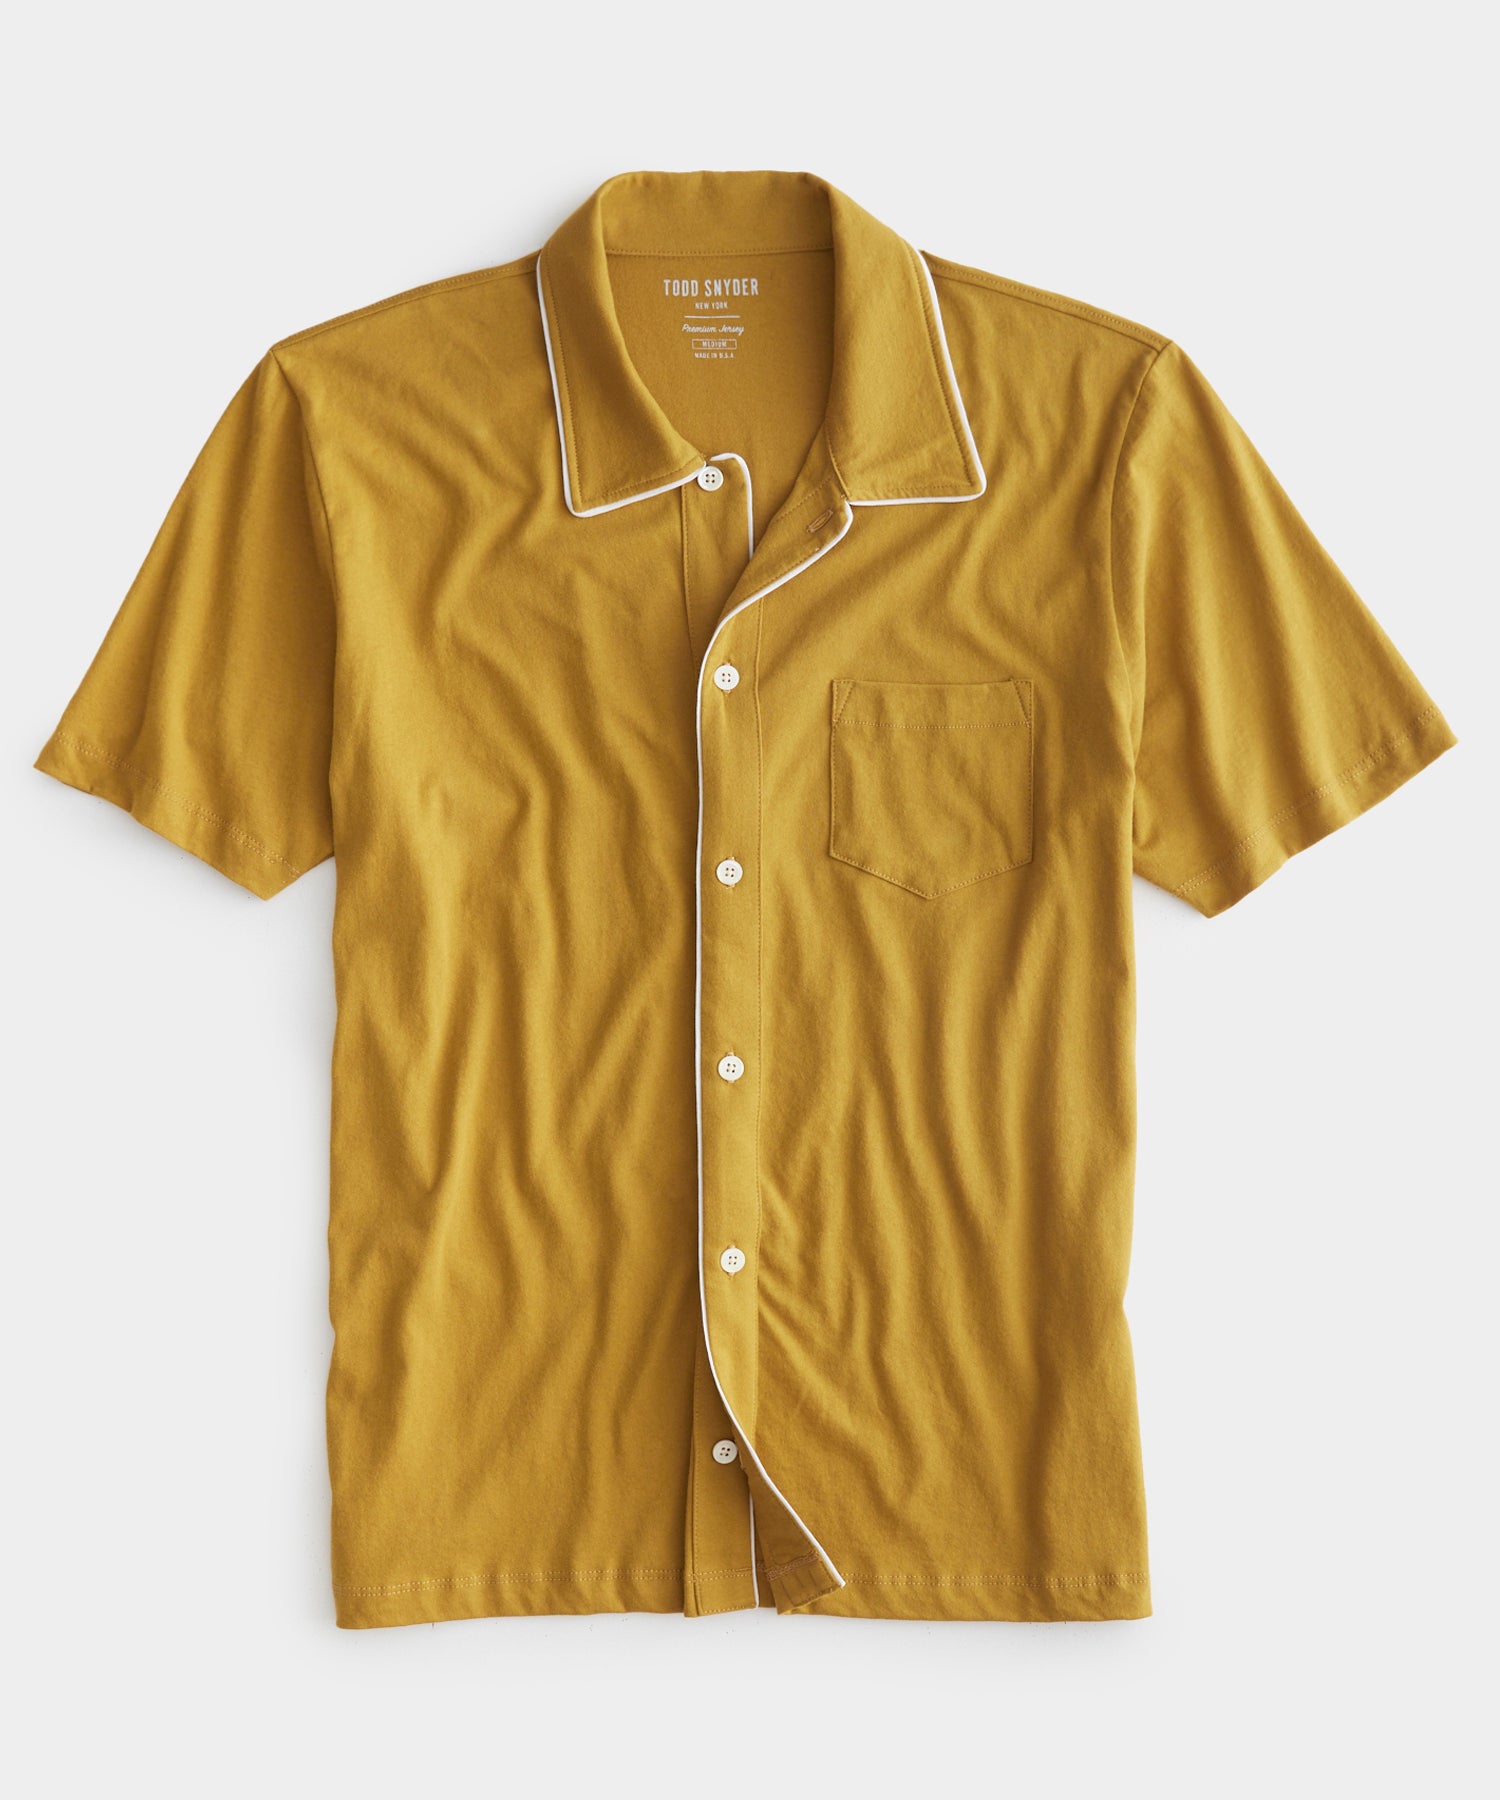 Mens Vintage Shirts – Casual, Dress, T-shirts, Polos Made in L.A. Montauk Tipped Full Placket Polo in Bitter Gold $128.00 AT vintagedancer.com